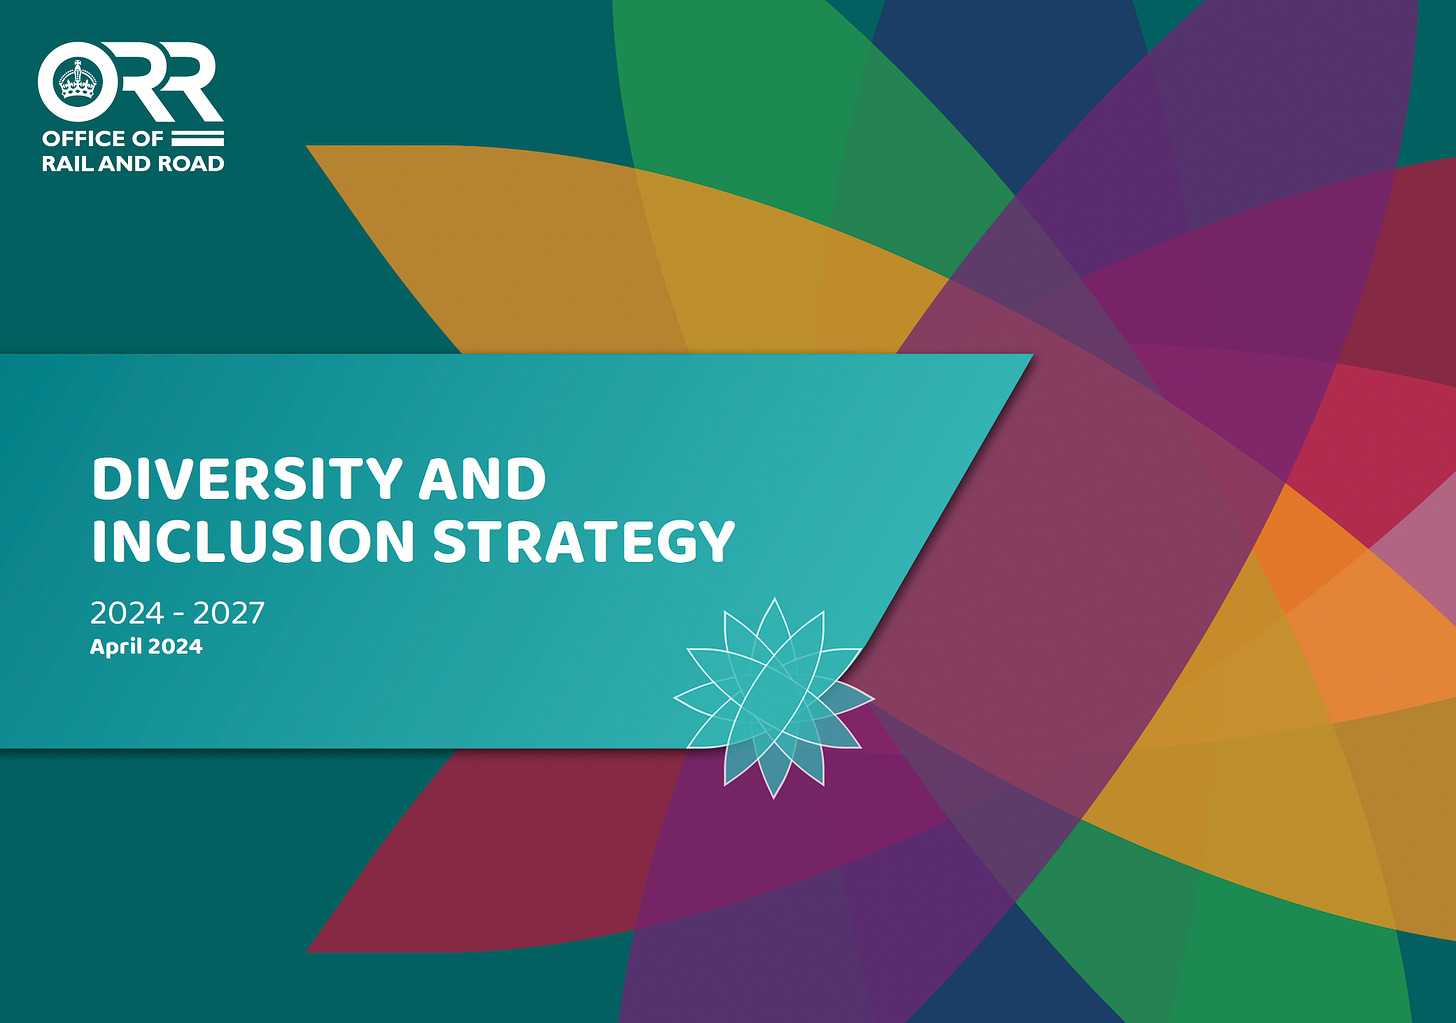 Colourful cover of the ORR report on their Diversity and Inclusion strategy